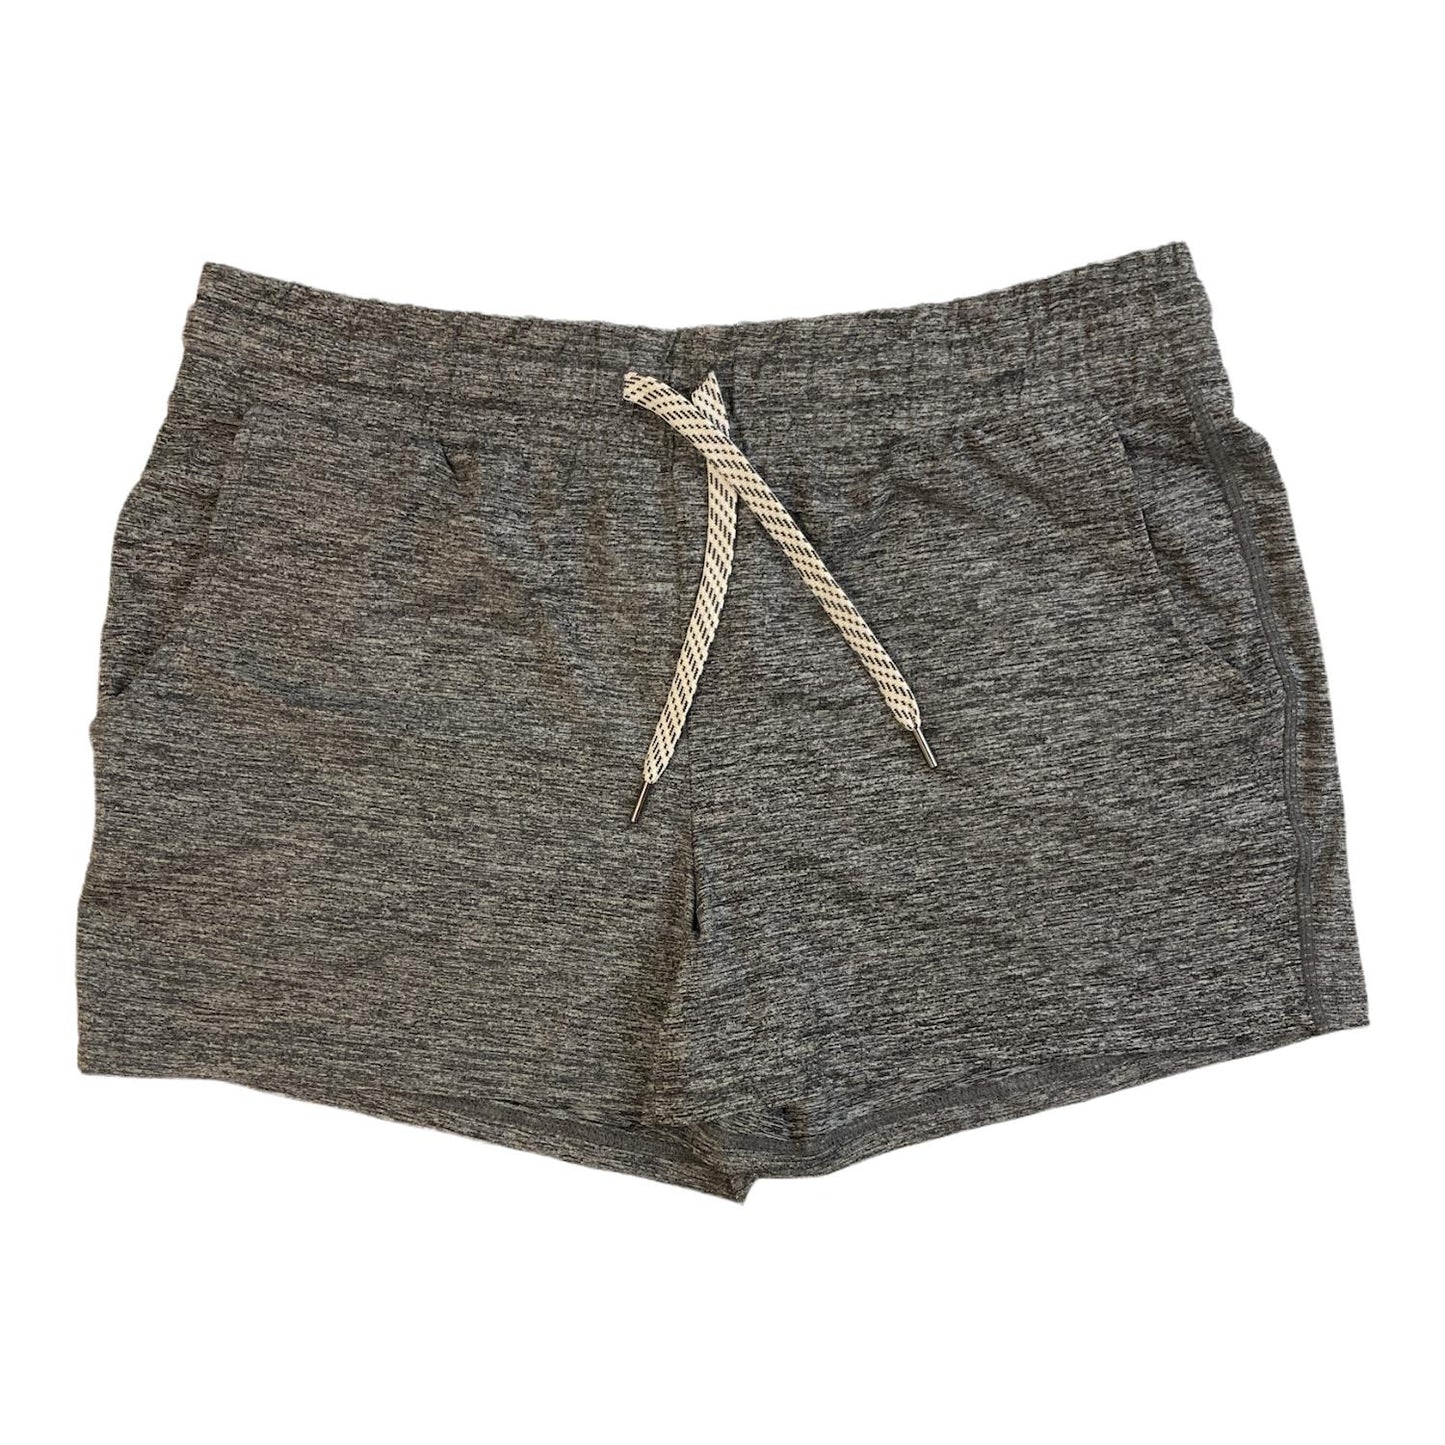 Member's Mark Women's Relaxed Fit Favorite Soft Knit Shorts